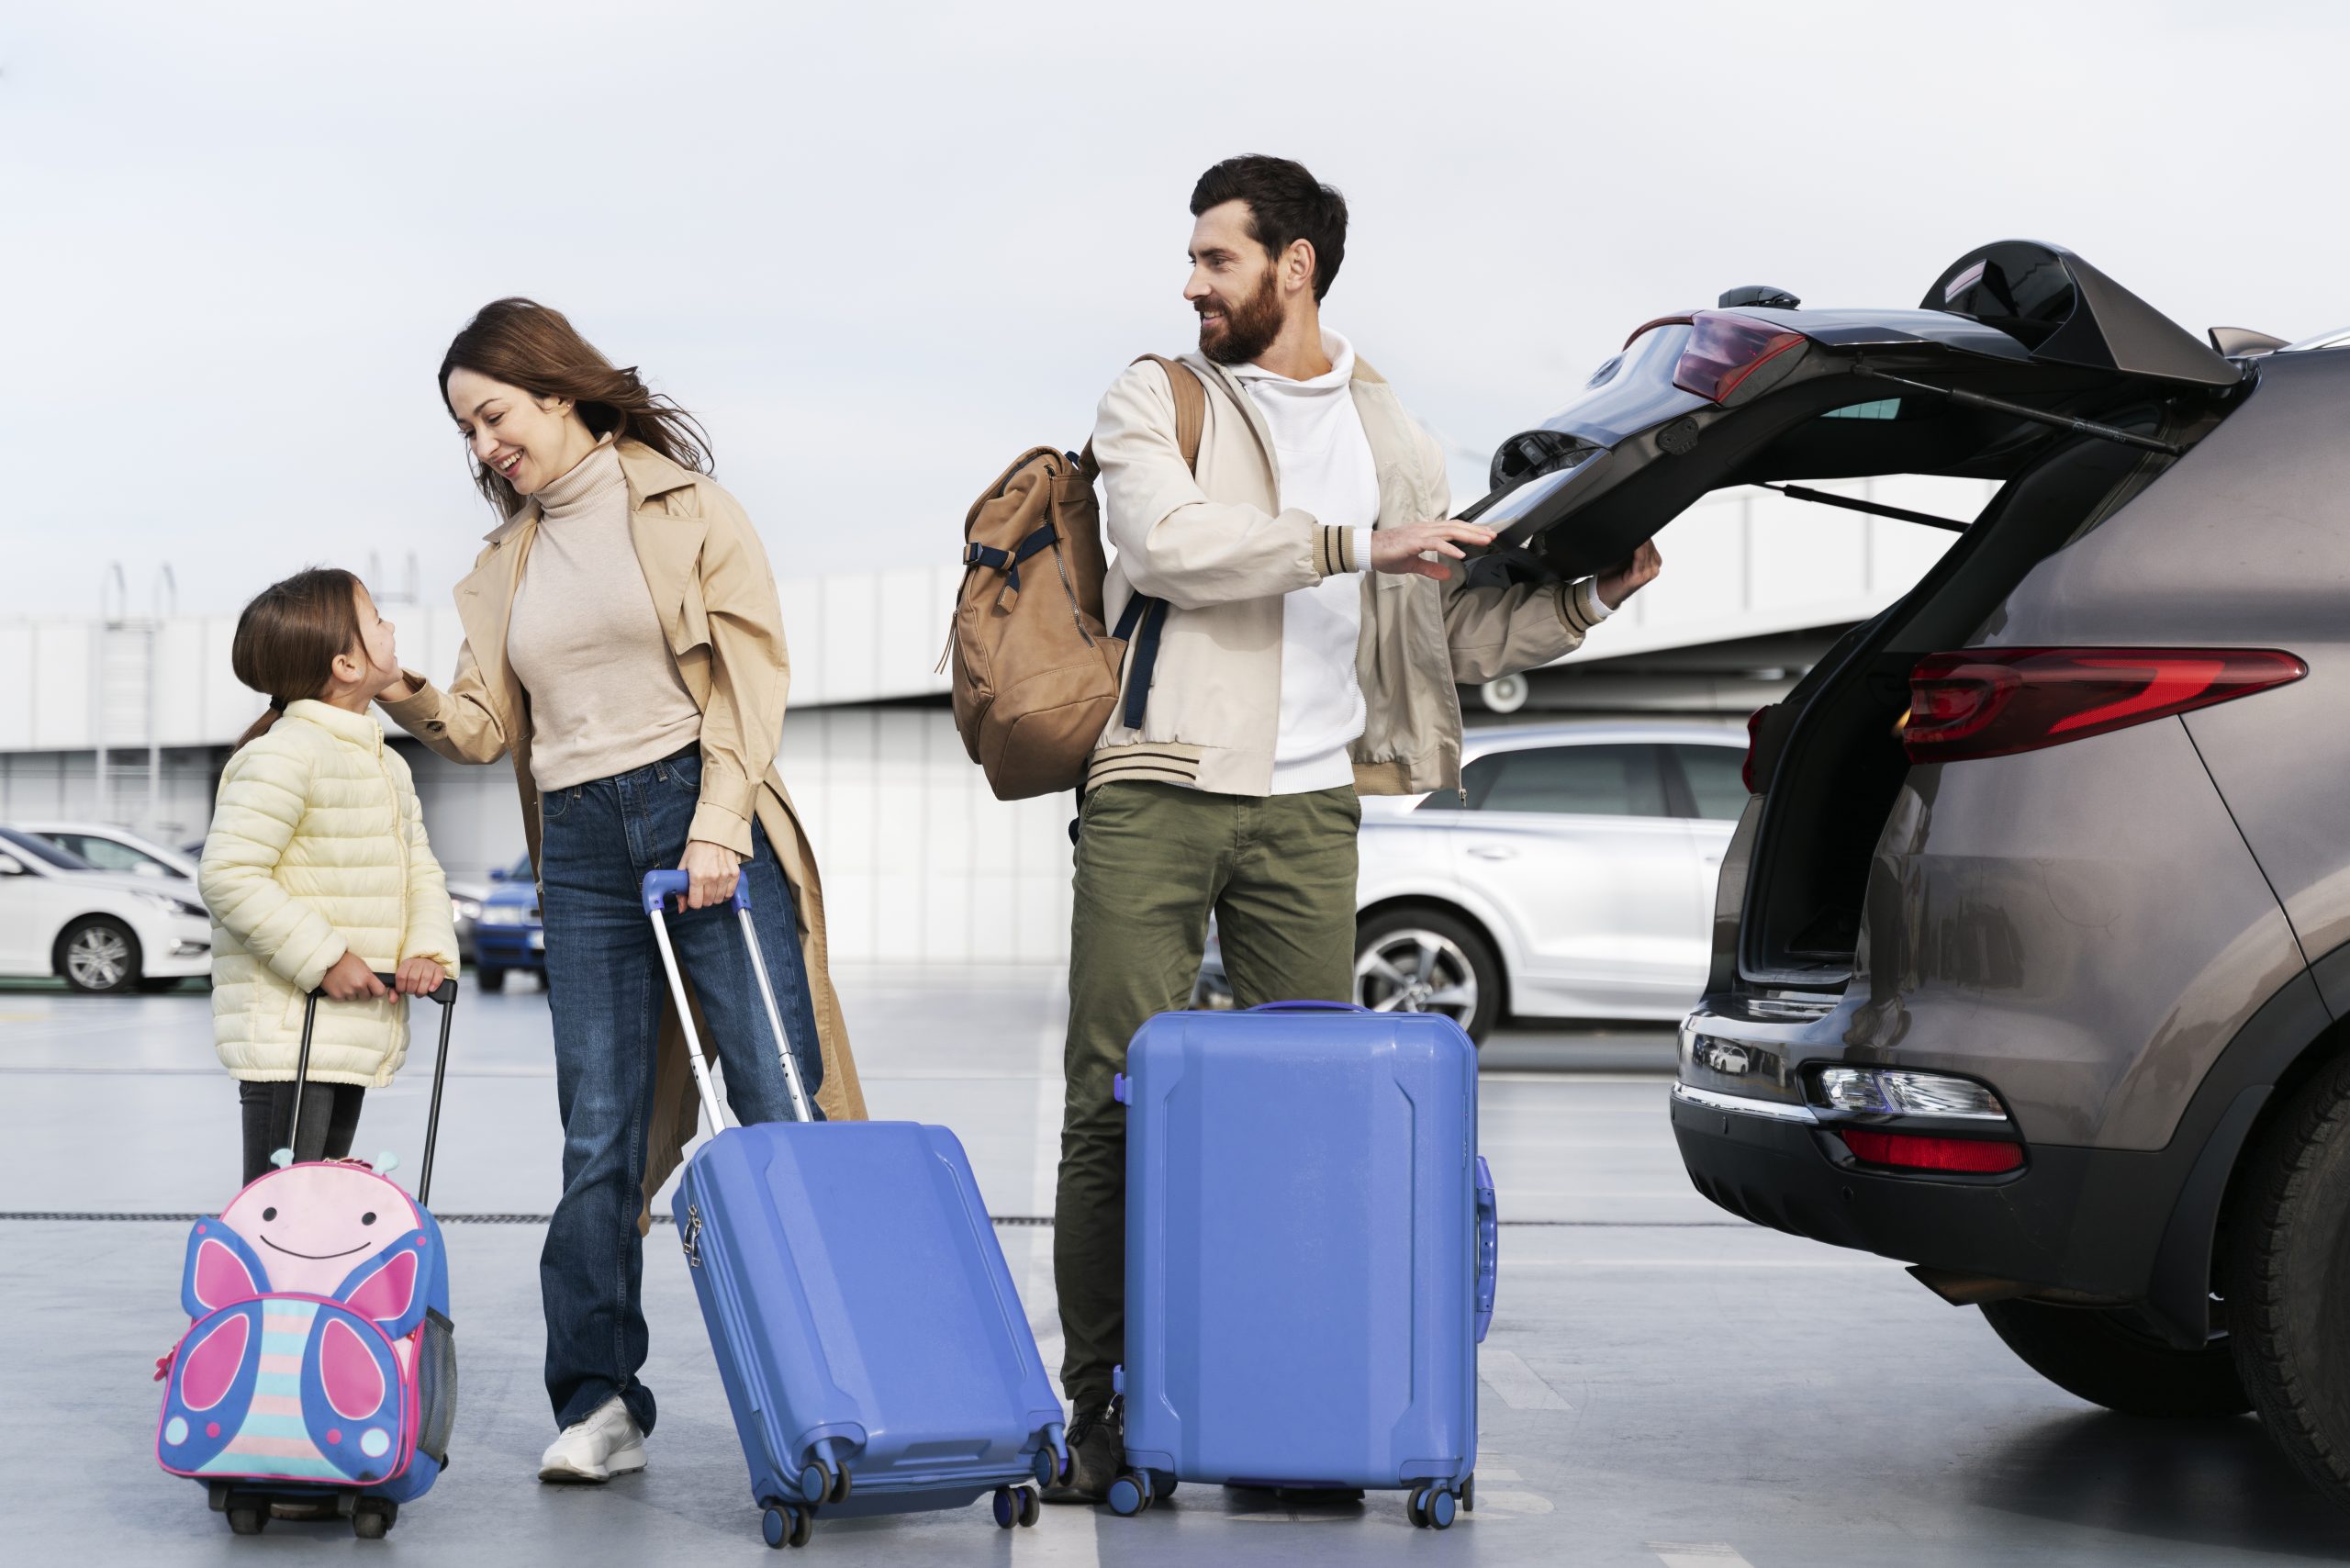 Private Car Service at O’hare Airport